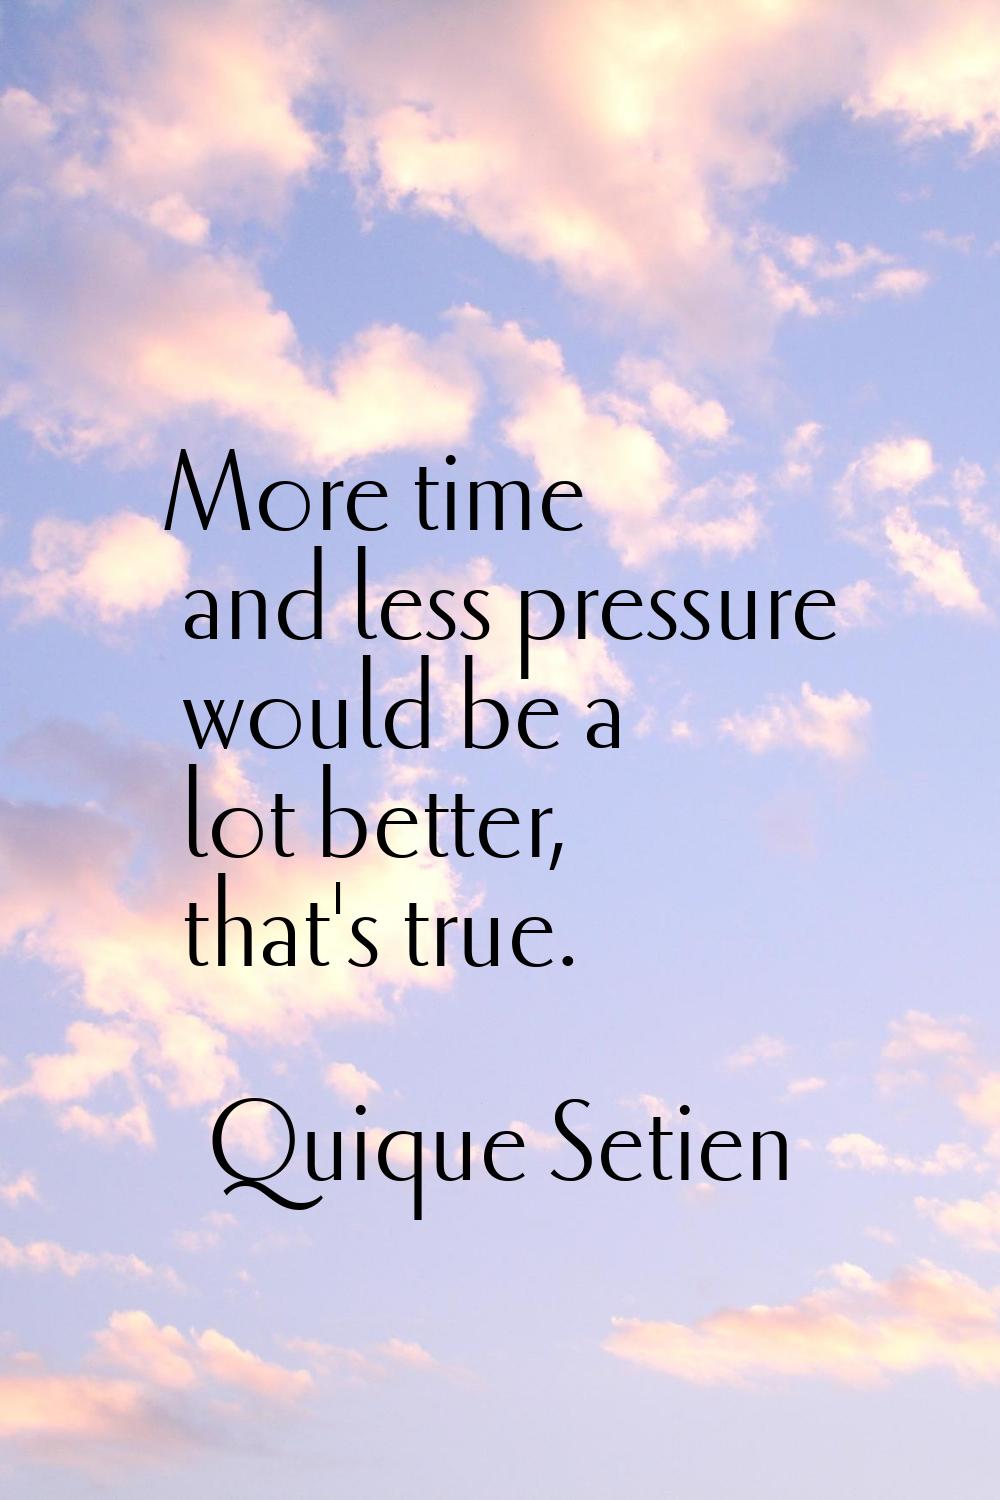 More time and less pressure would be a lot better, that's true.